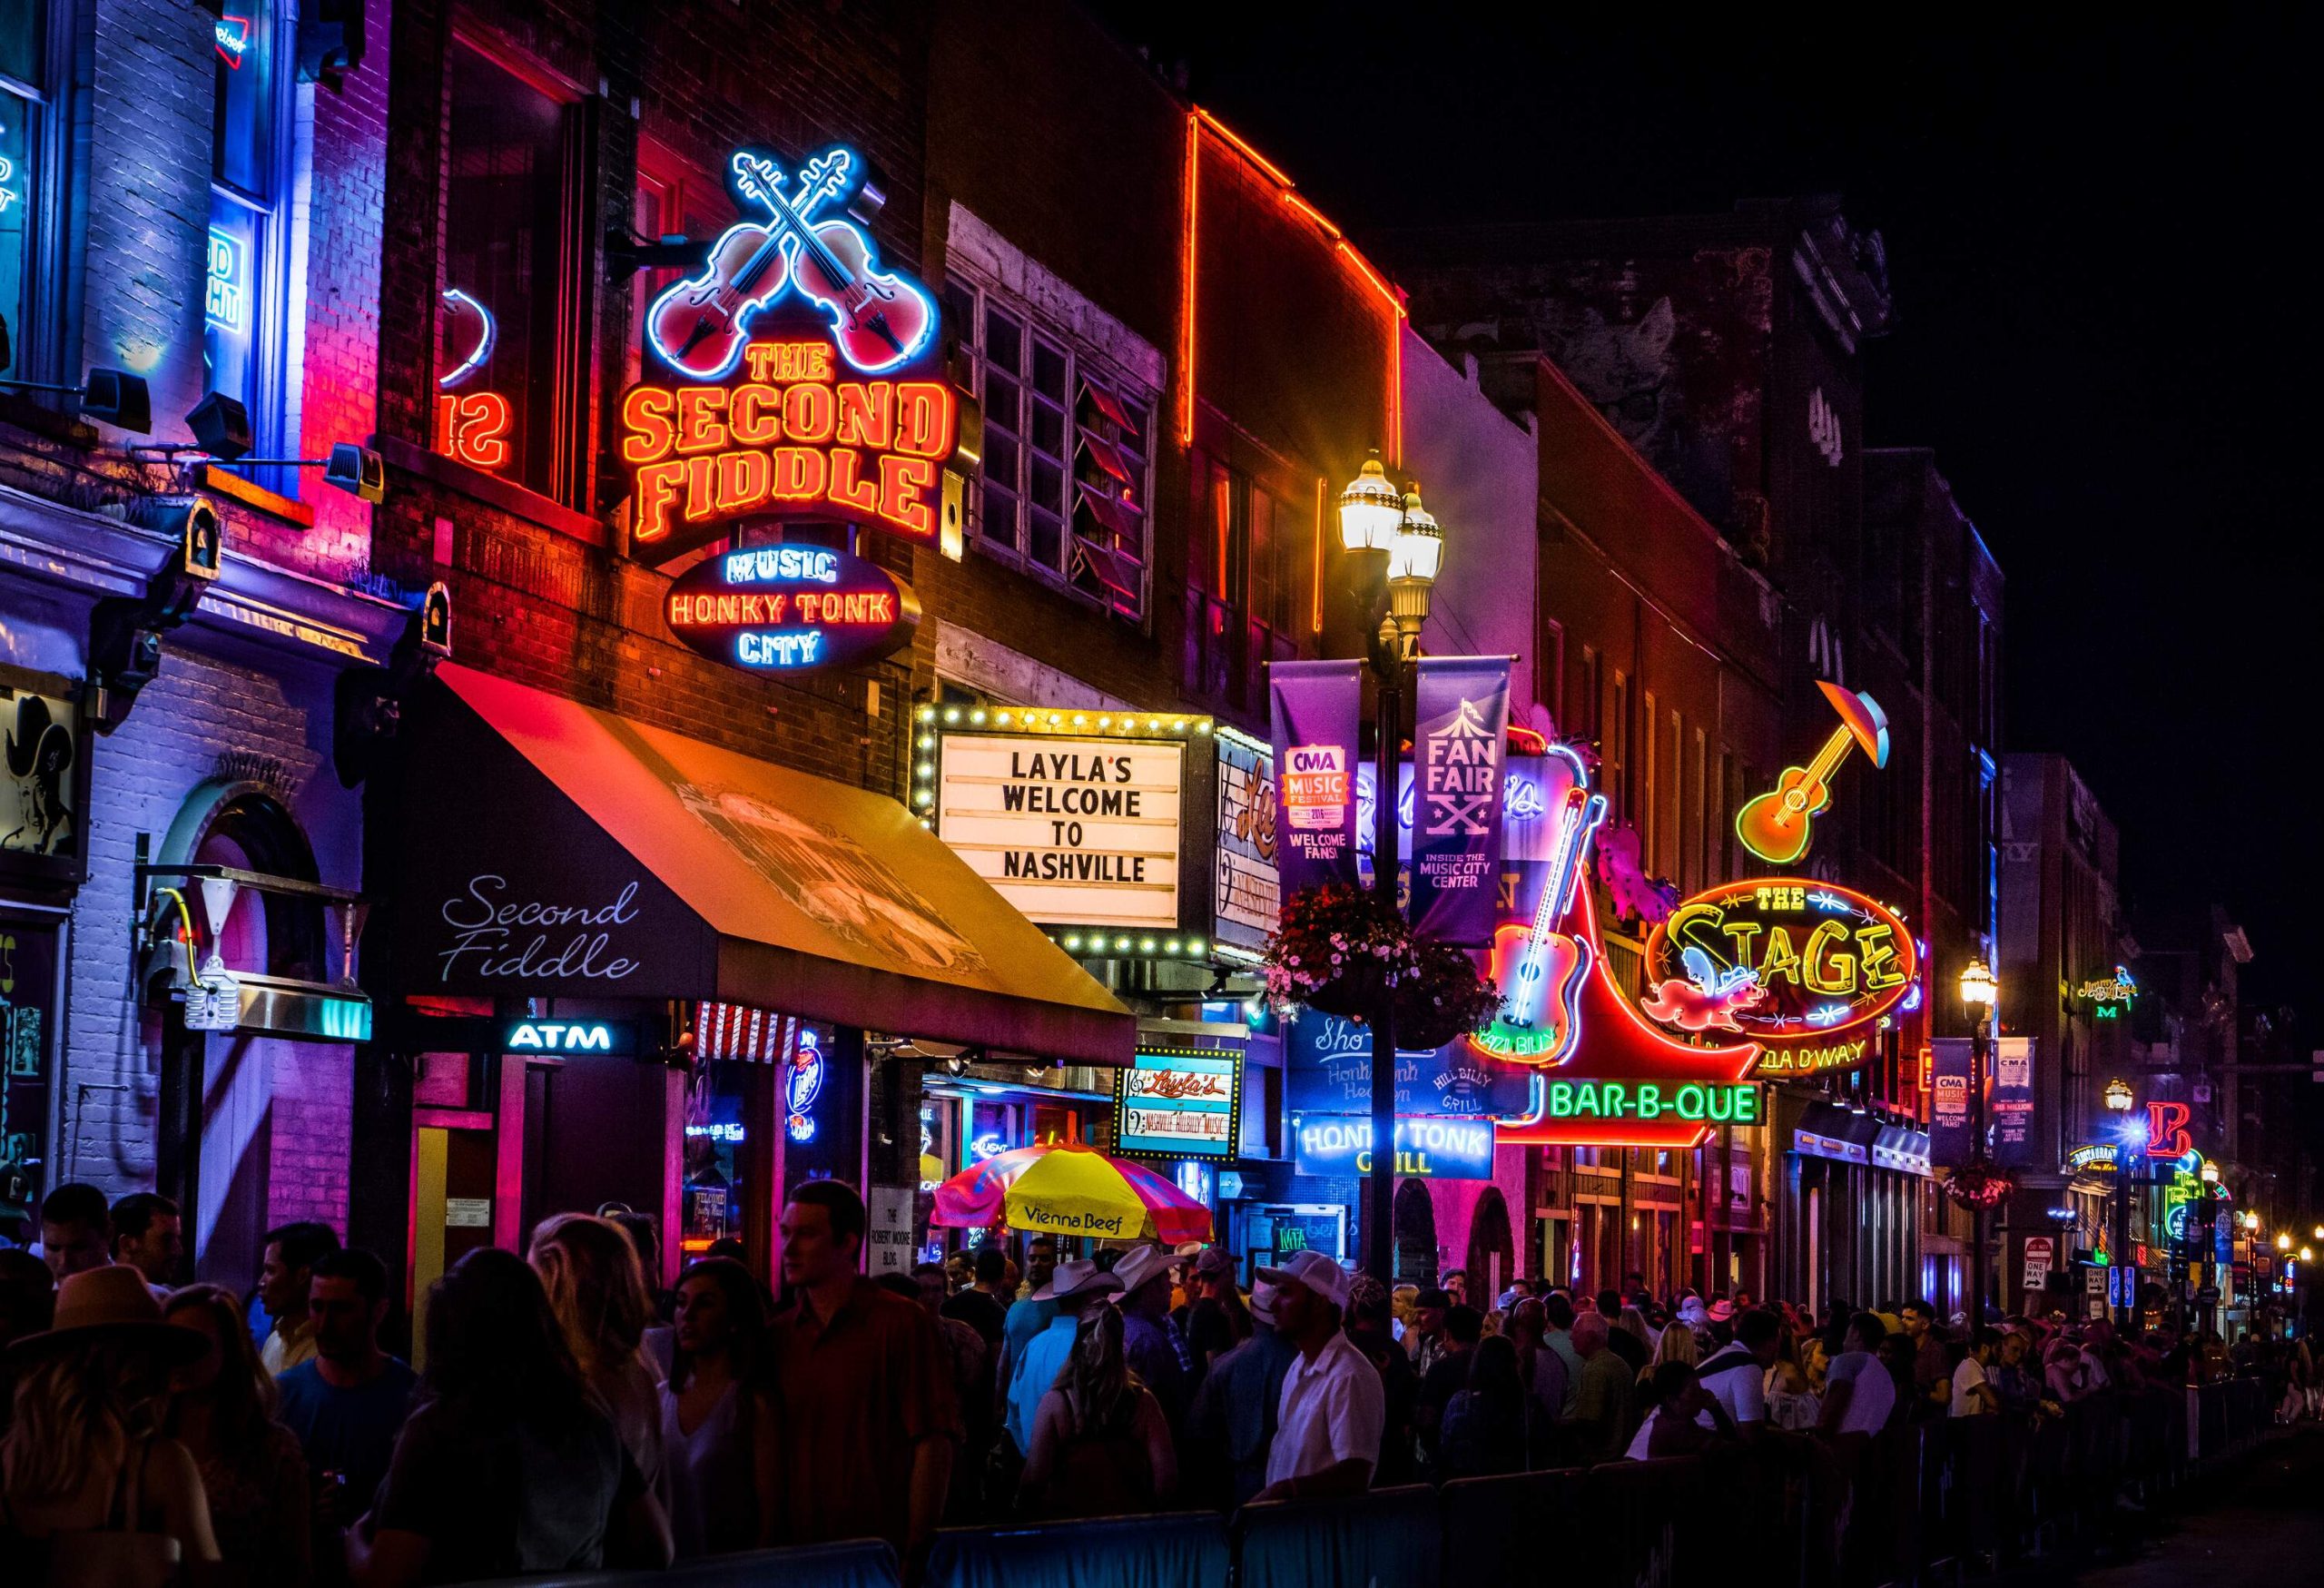 The lively sidewalk of the entertainment district teems with a vibrant crowd, as the mesmerising glow of neon lights from overhead signage adds an electric atmosphere to the bustling scene.